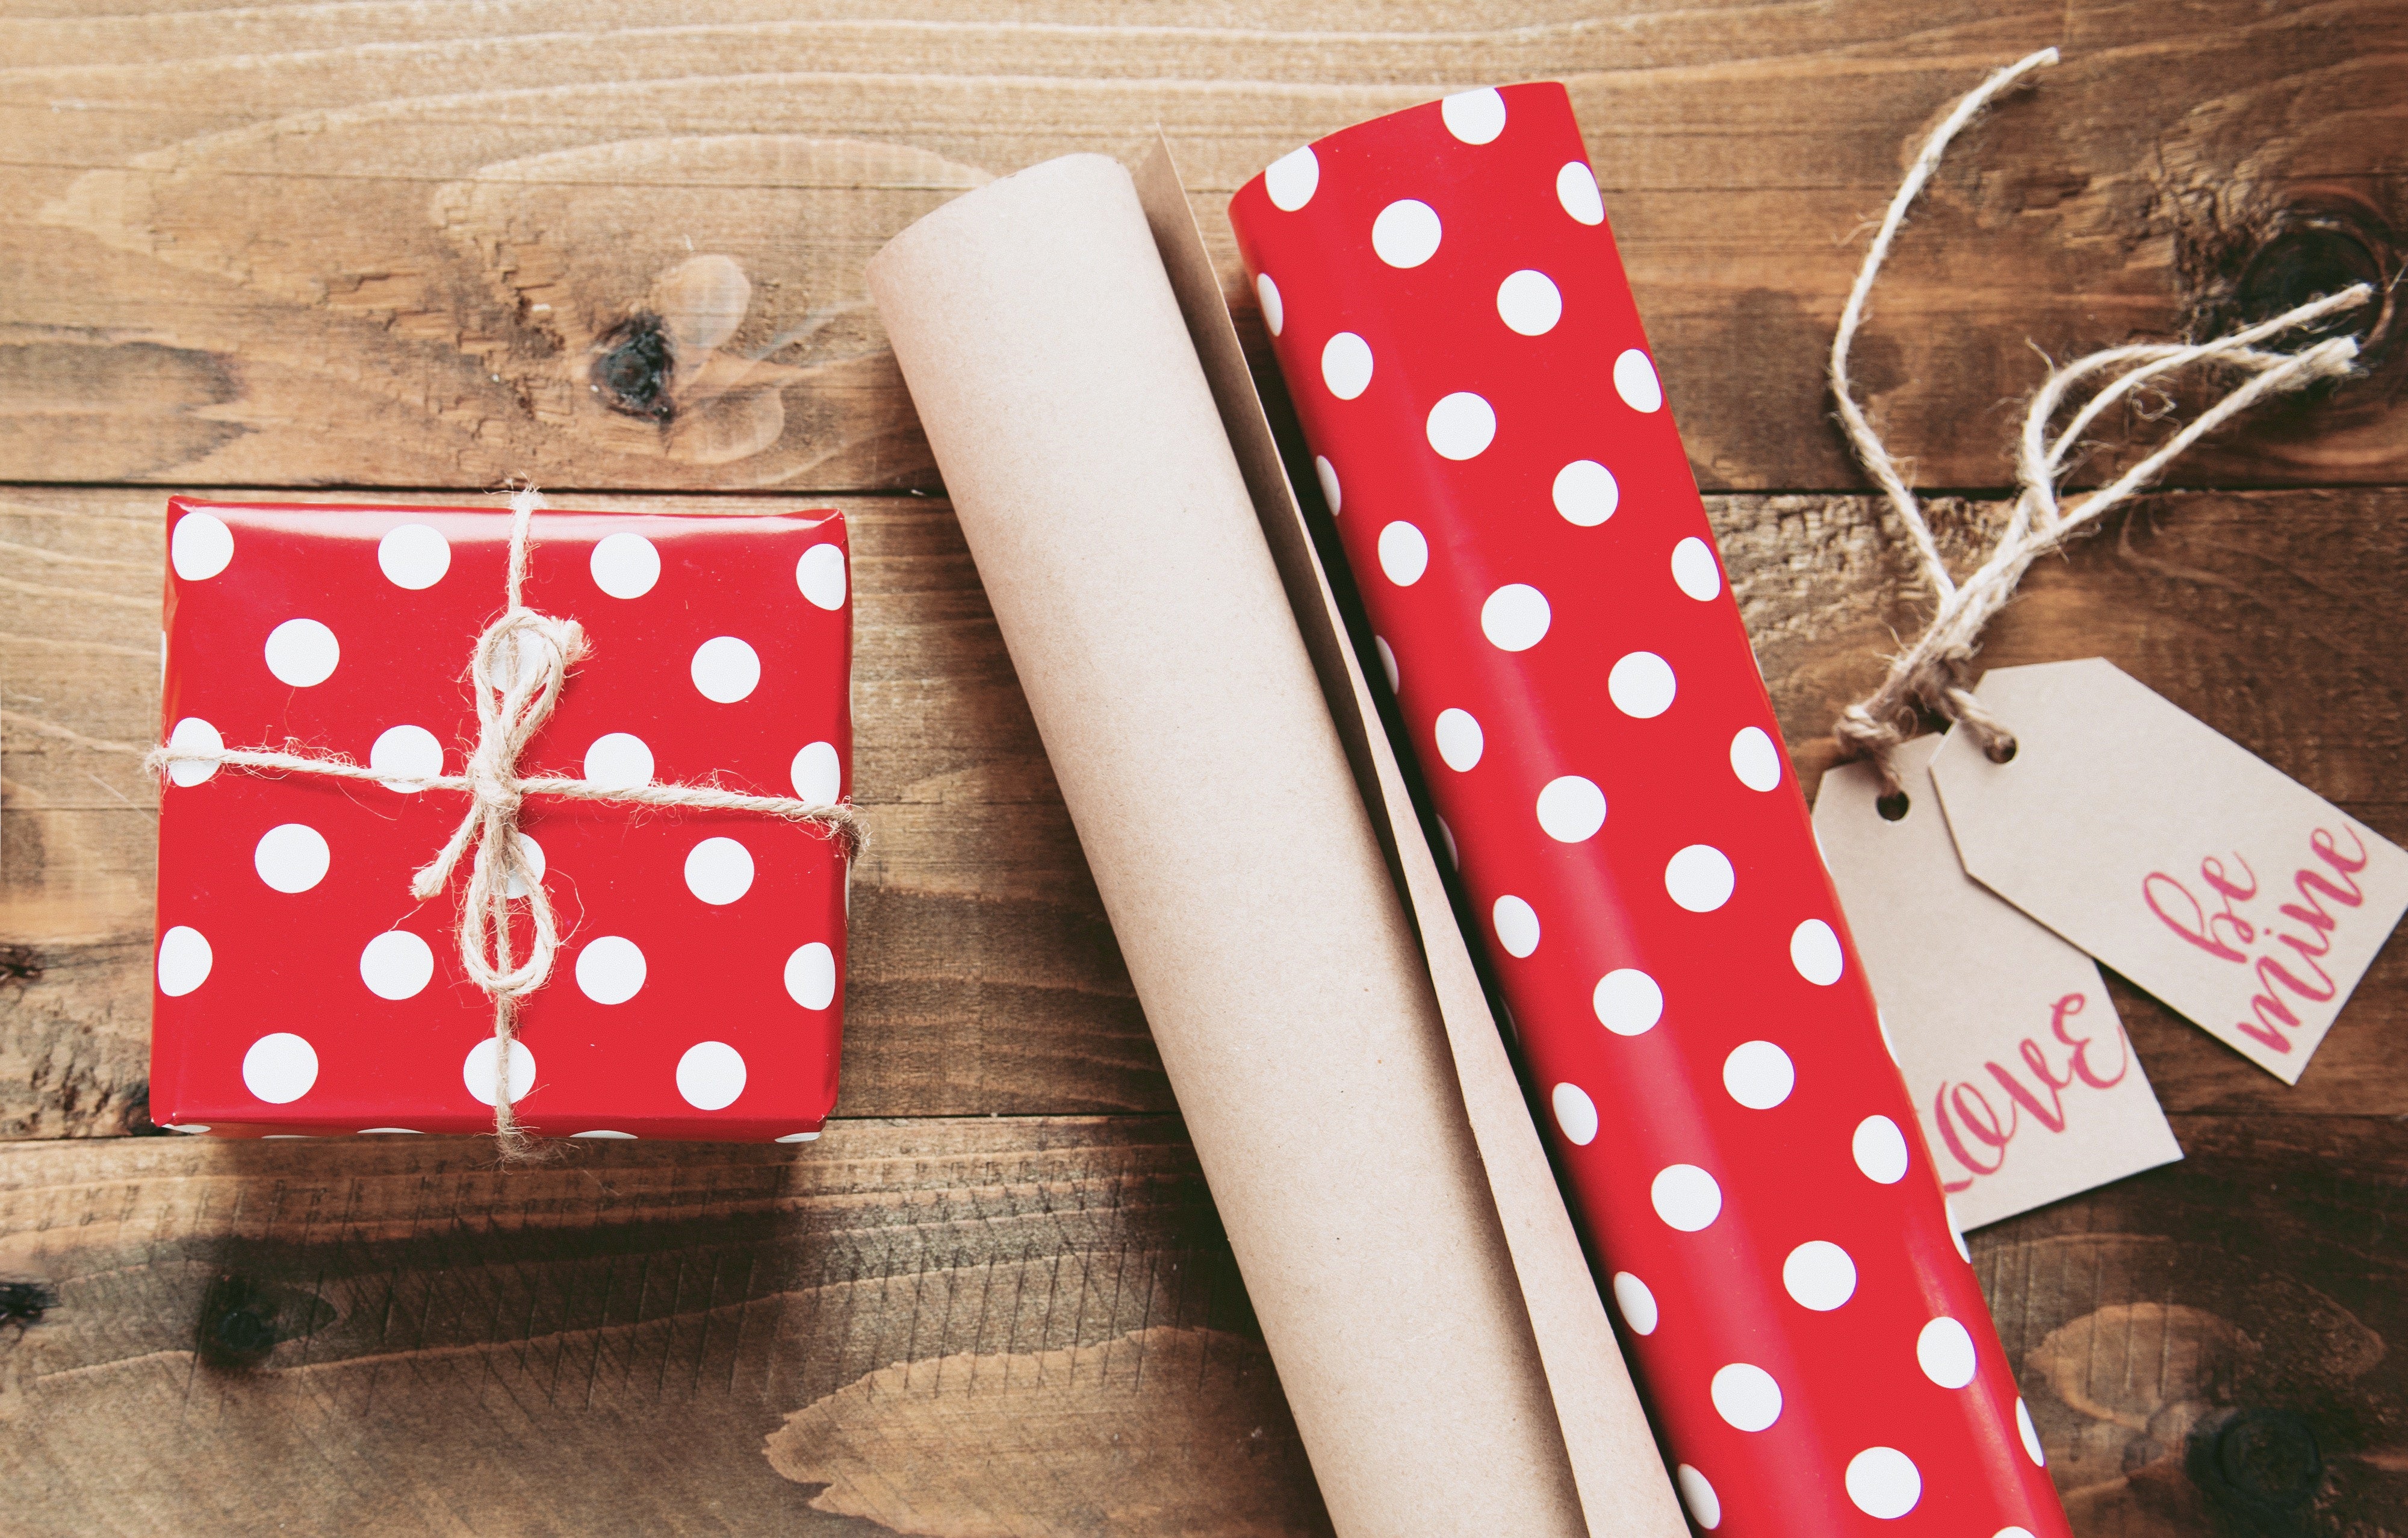 How to wrap a gift for in a clever way?